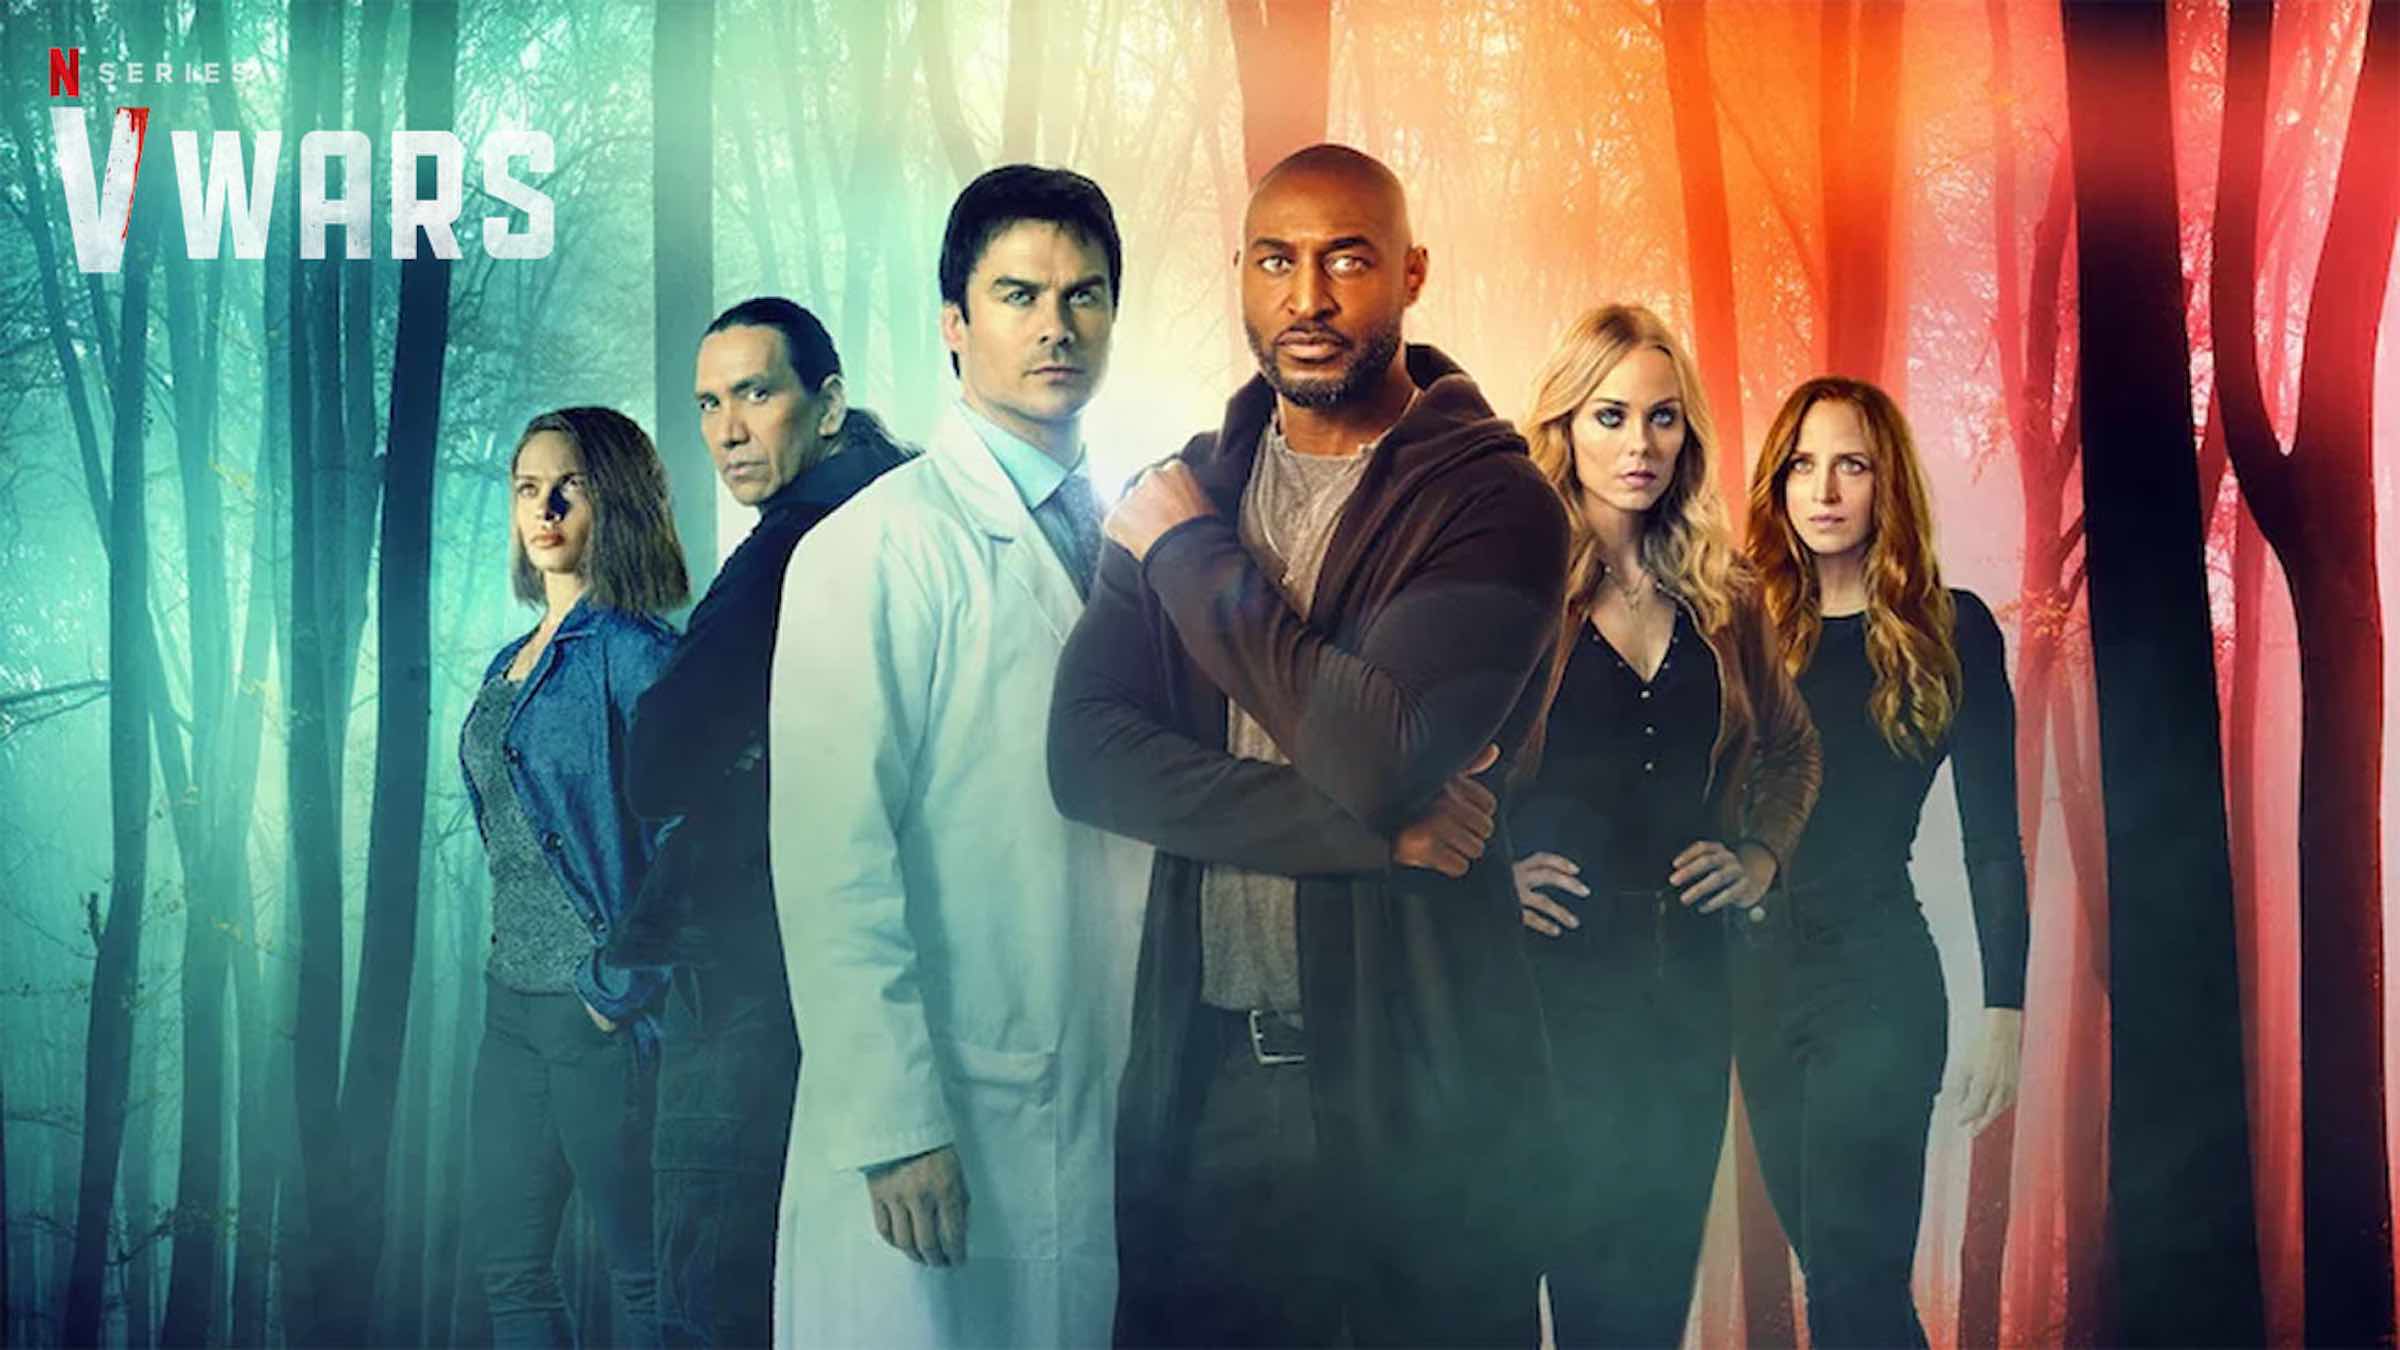 Thank goodness Netflix is looking to change things up with 'V Wars'. Ian Somerhalder’s not the only vampire in the cast! Find out more now.